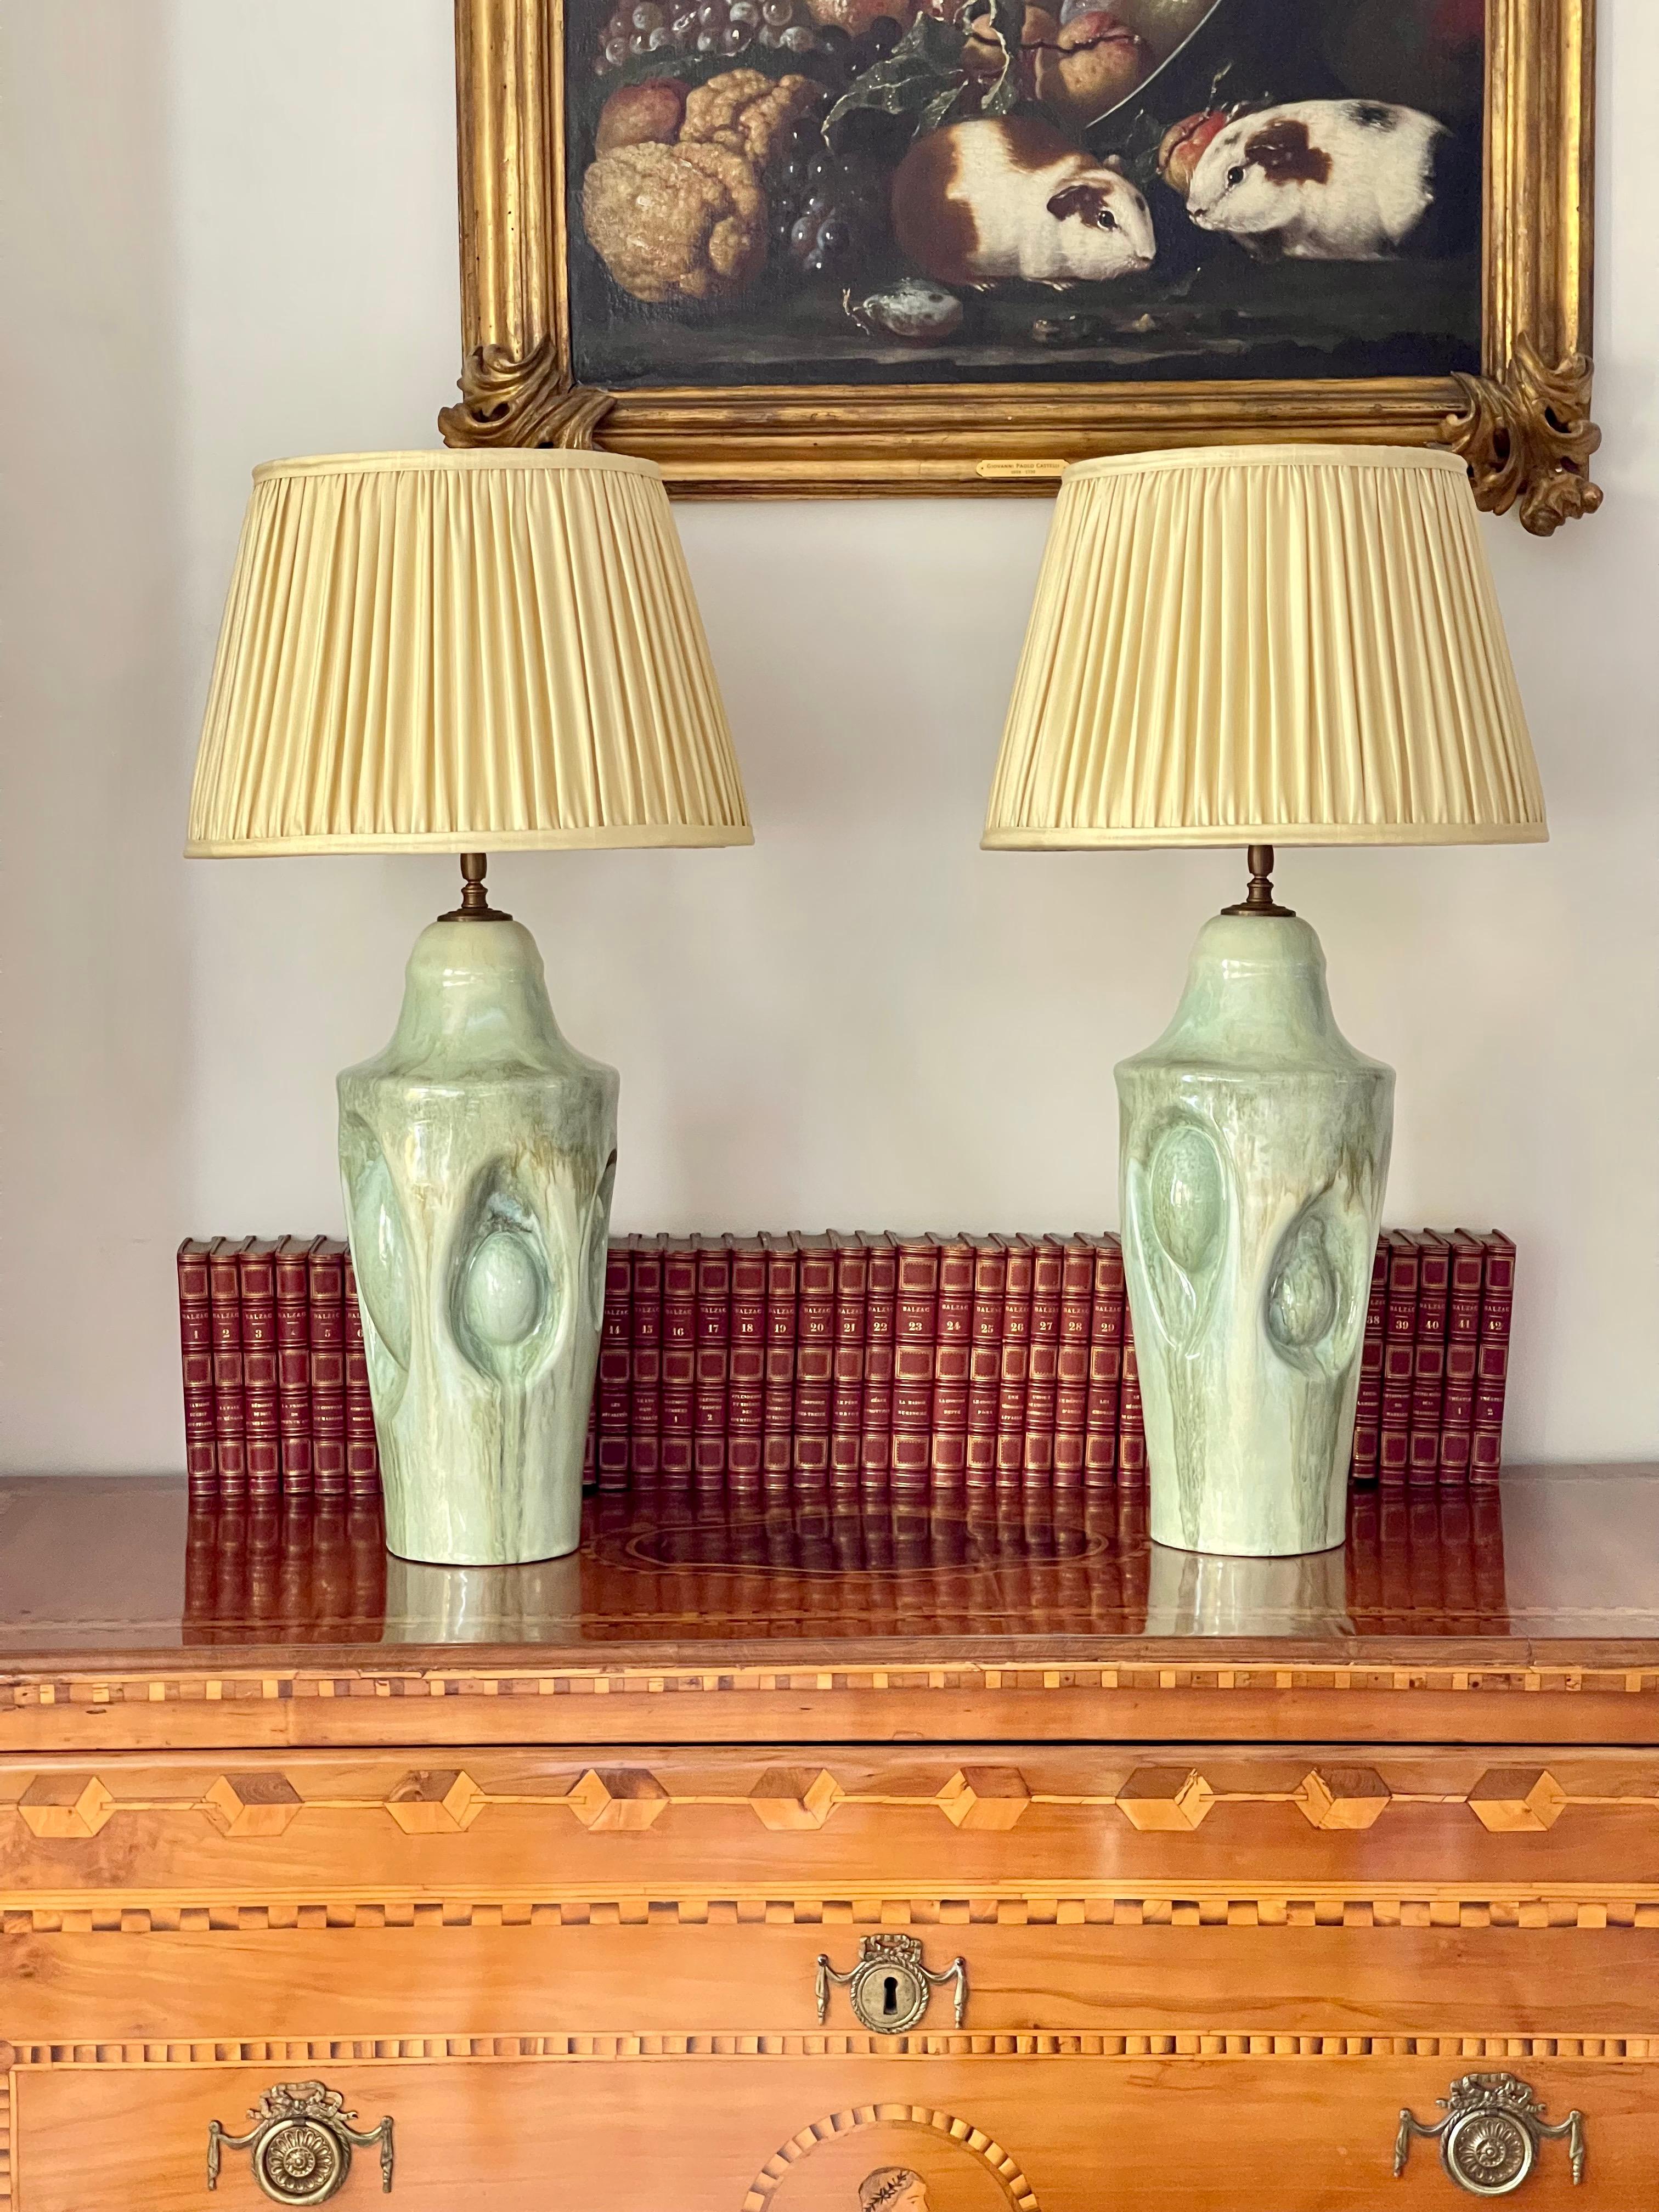 Handmade ceramic Table Lamps (pair) by Violante Lodolo D'Oria  one of a kind hand built stoneware with multiple glazes
Measures: Lamp base approximate  17 cm width 48cm height - total height with lamp shades approximate 76 cm, lampshades are not